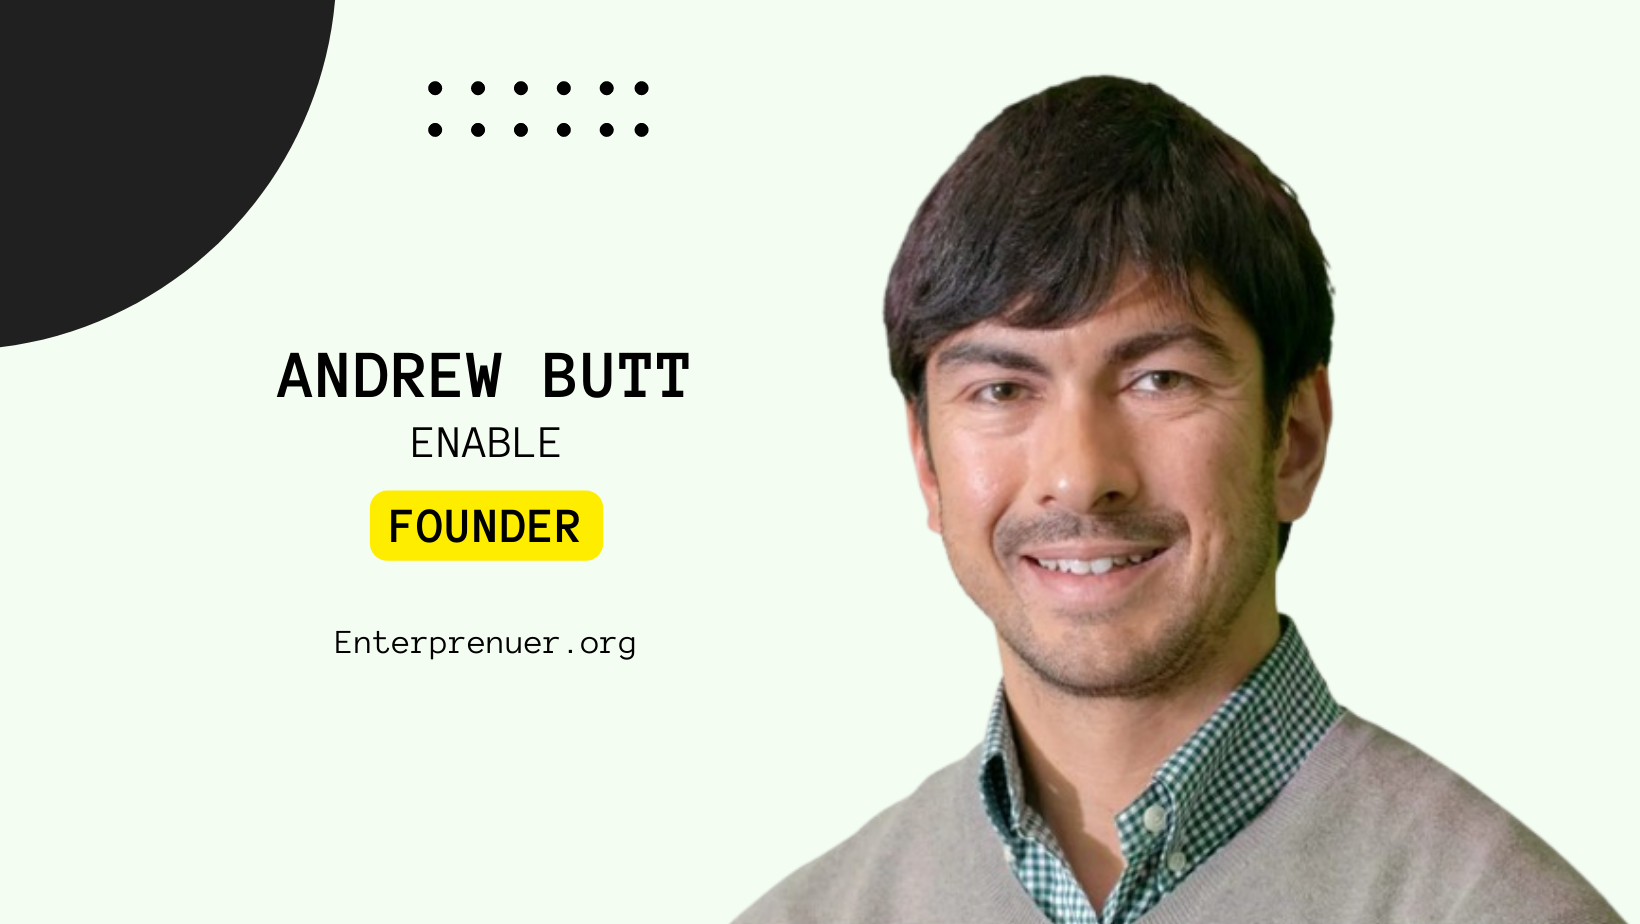 Meet Andrew Butt Co-Founder of Enable